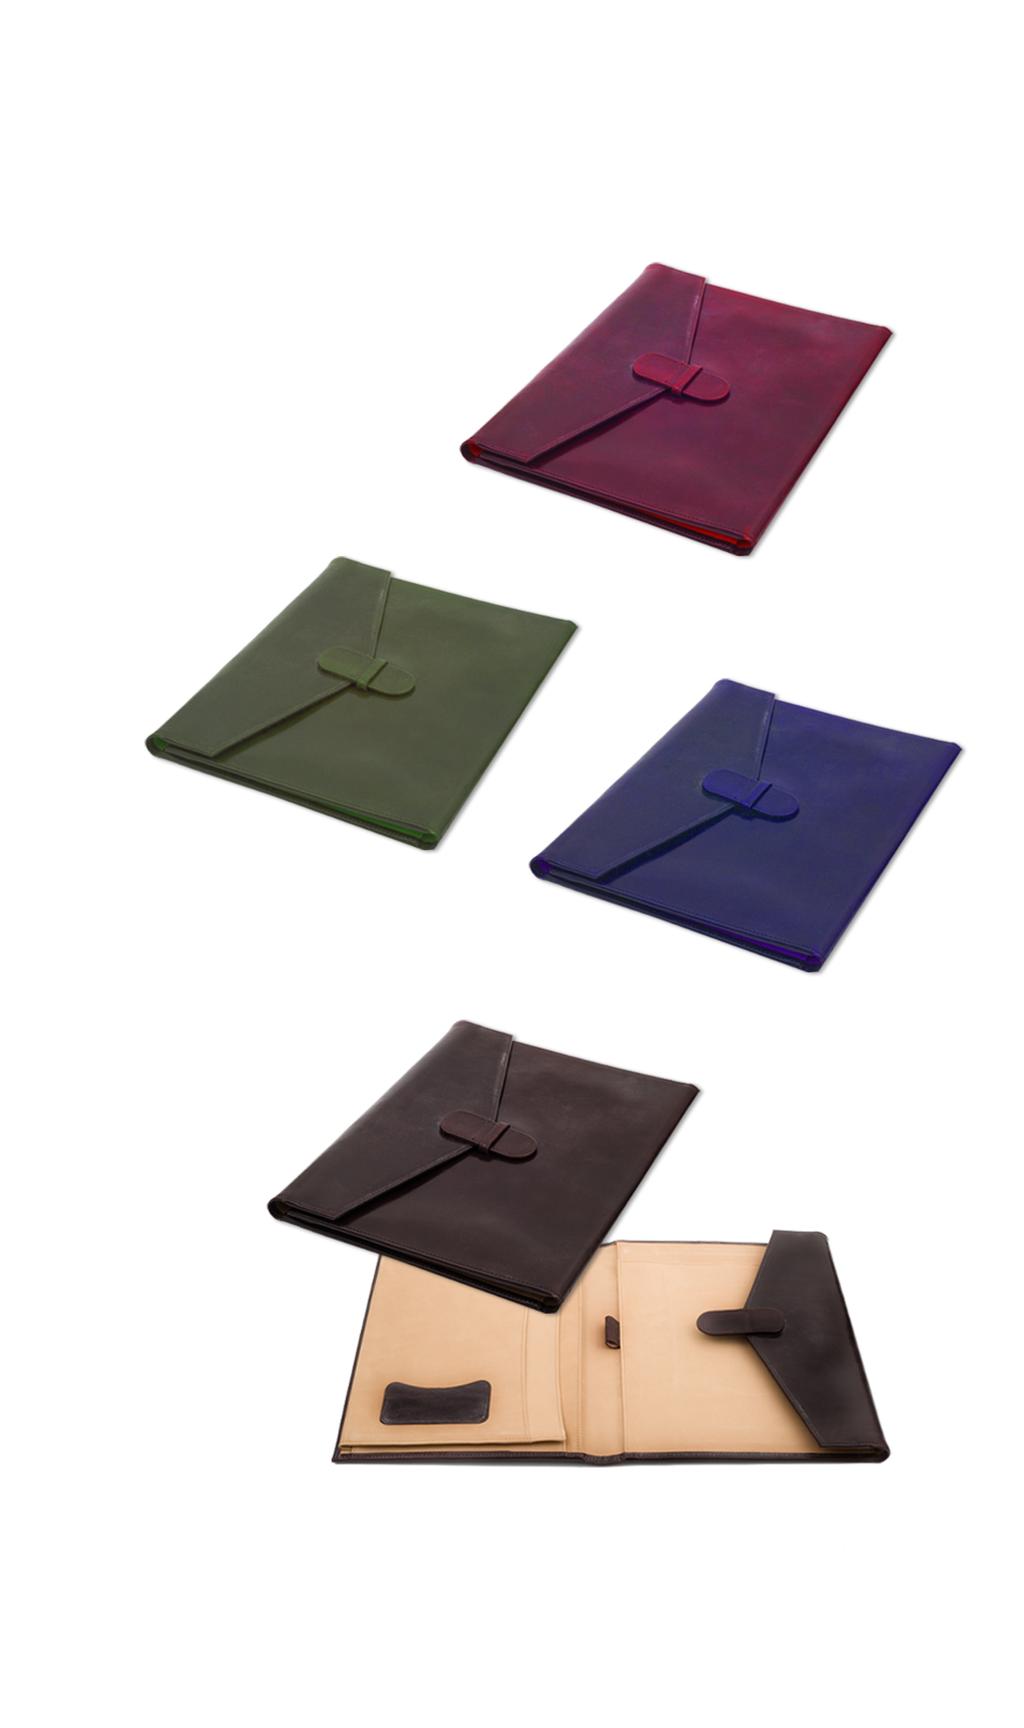 A5 NOTEBOOK FOLDER - Travel Hand size A% leather folder with the finest quality leather and a luxurious contrast suede lining.